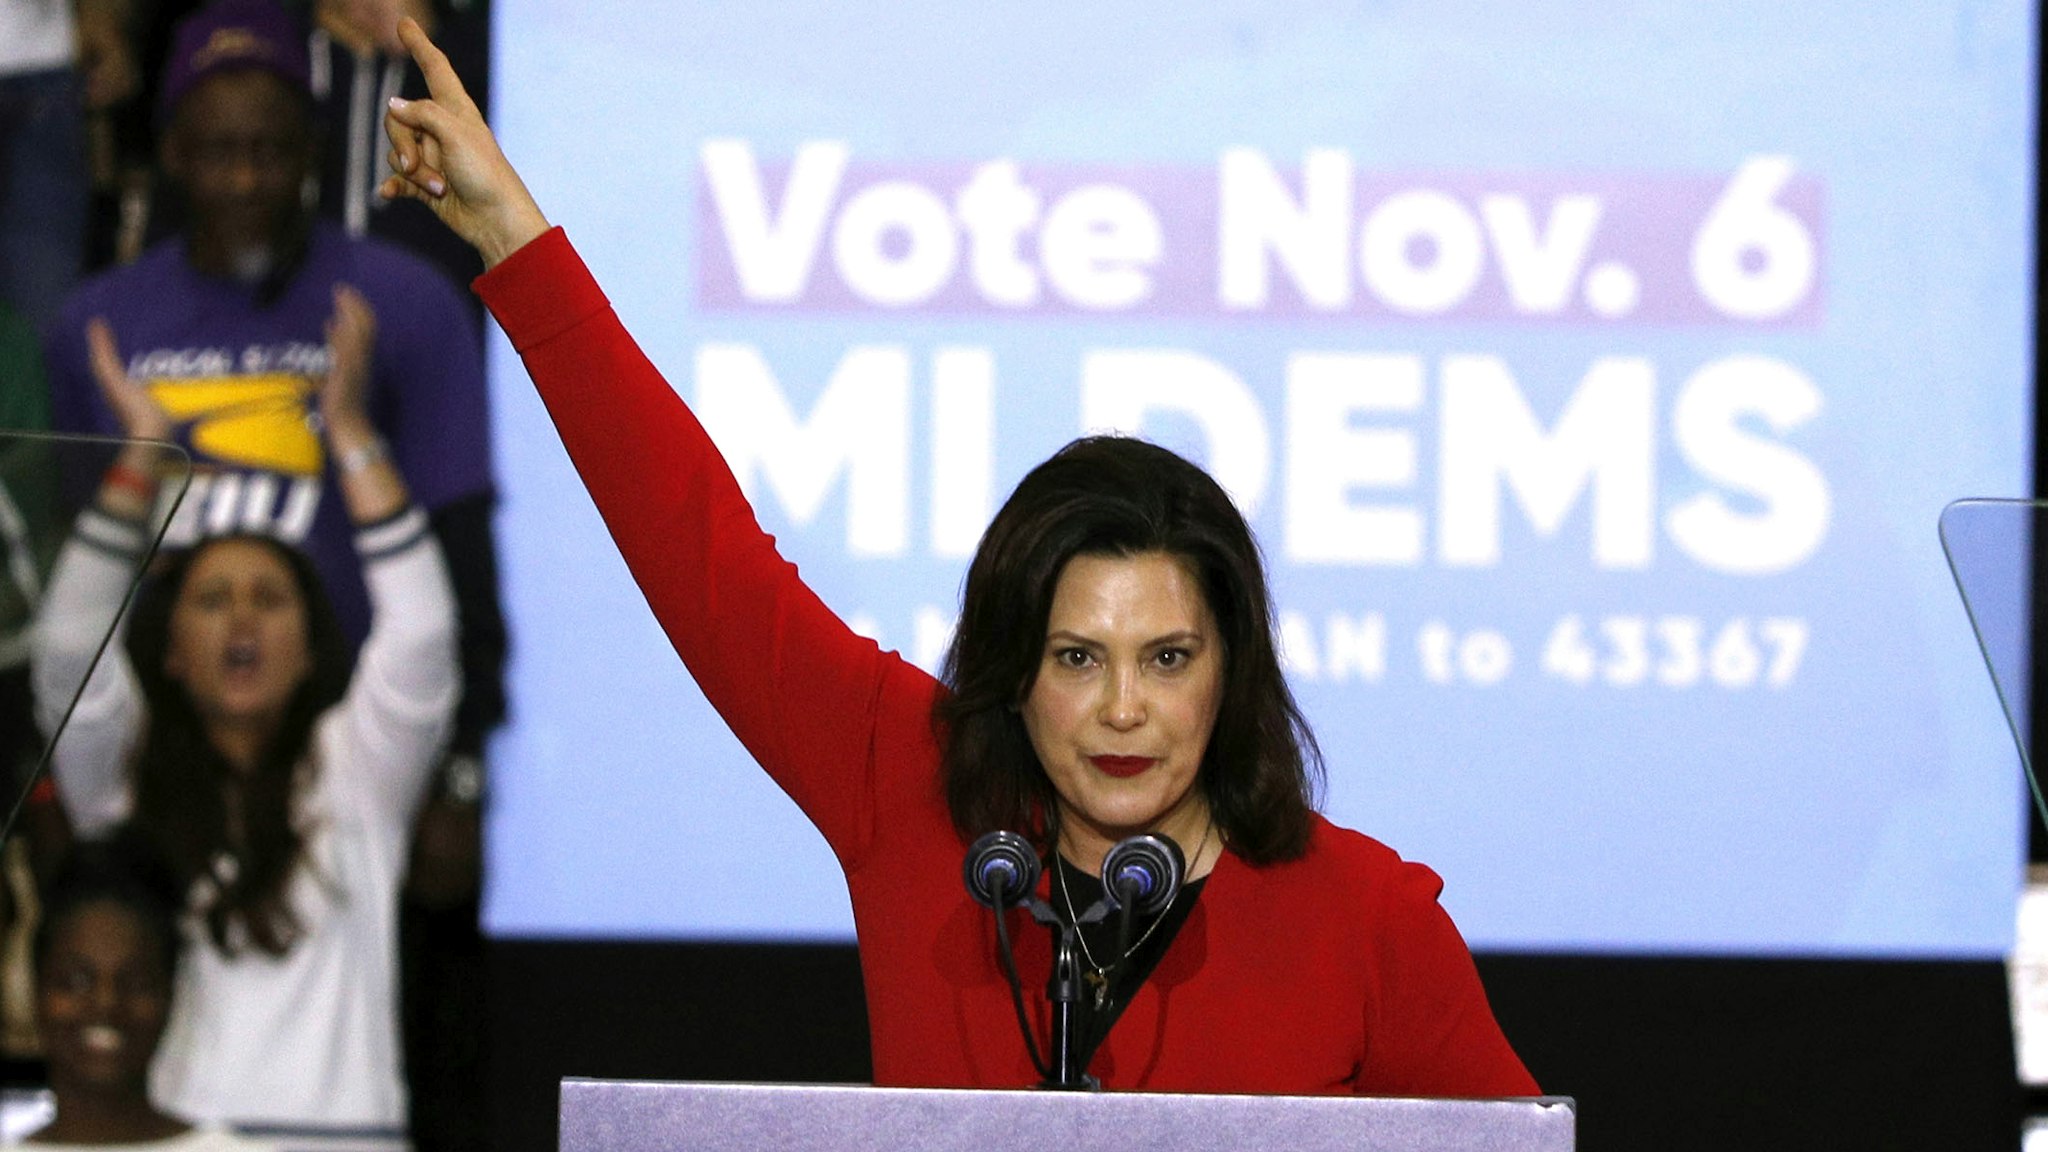 DETROIT, MI - OCTOBER 26: Michigan gubernatorial candidate Gretchen Whitmer speaks at a Democratic rally attended by former President Barack Obama and former Attorney General Eric Holder at Detroit Cass Tech High School on October 26, 2018 in Detroit, Michigan. Obama, and Holder are among approximately a dozen democrats who were targeted by mail bombs over the past several days.